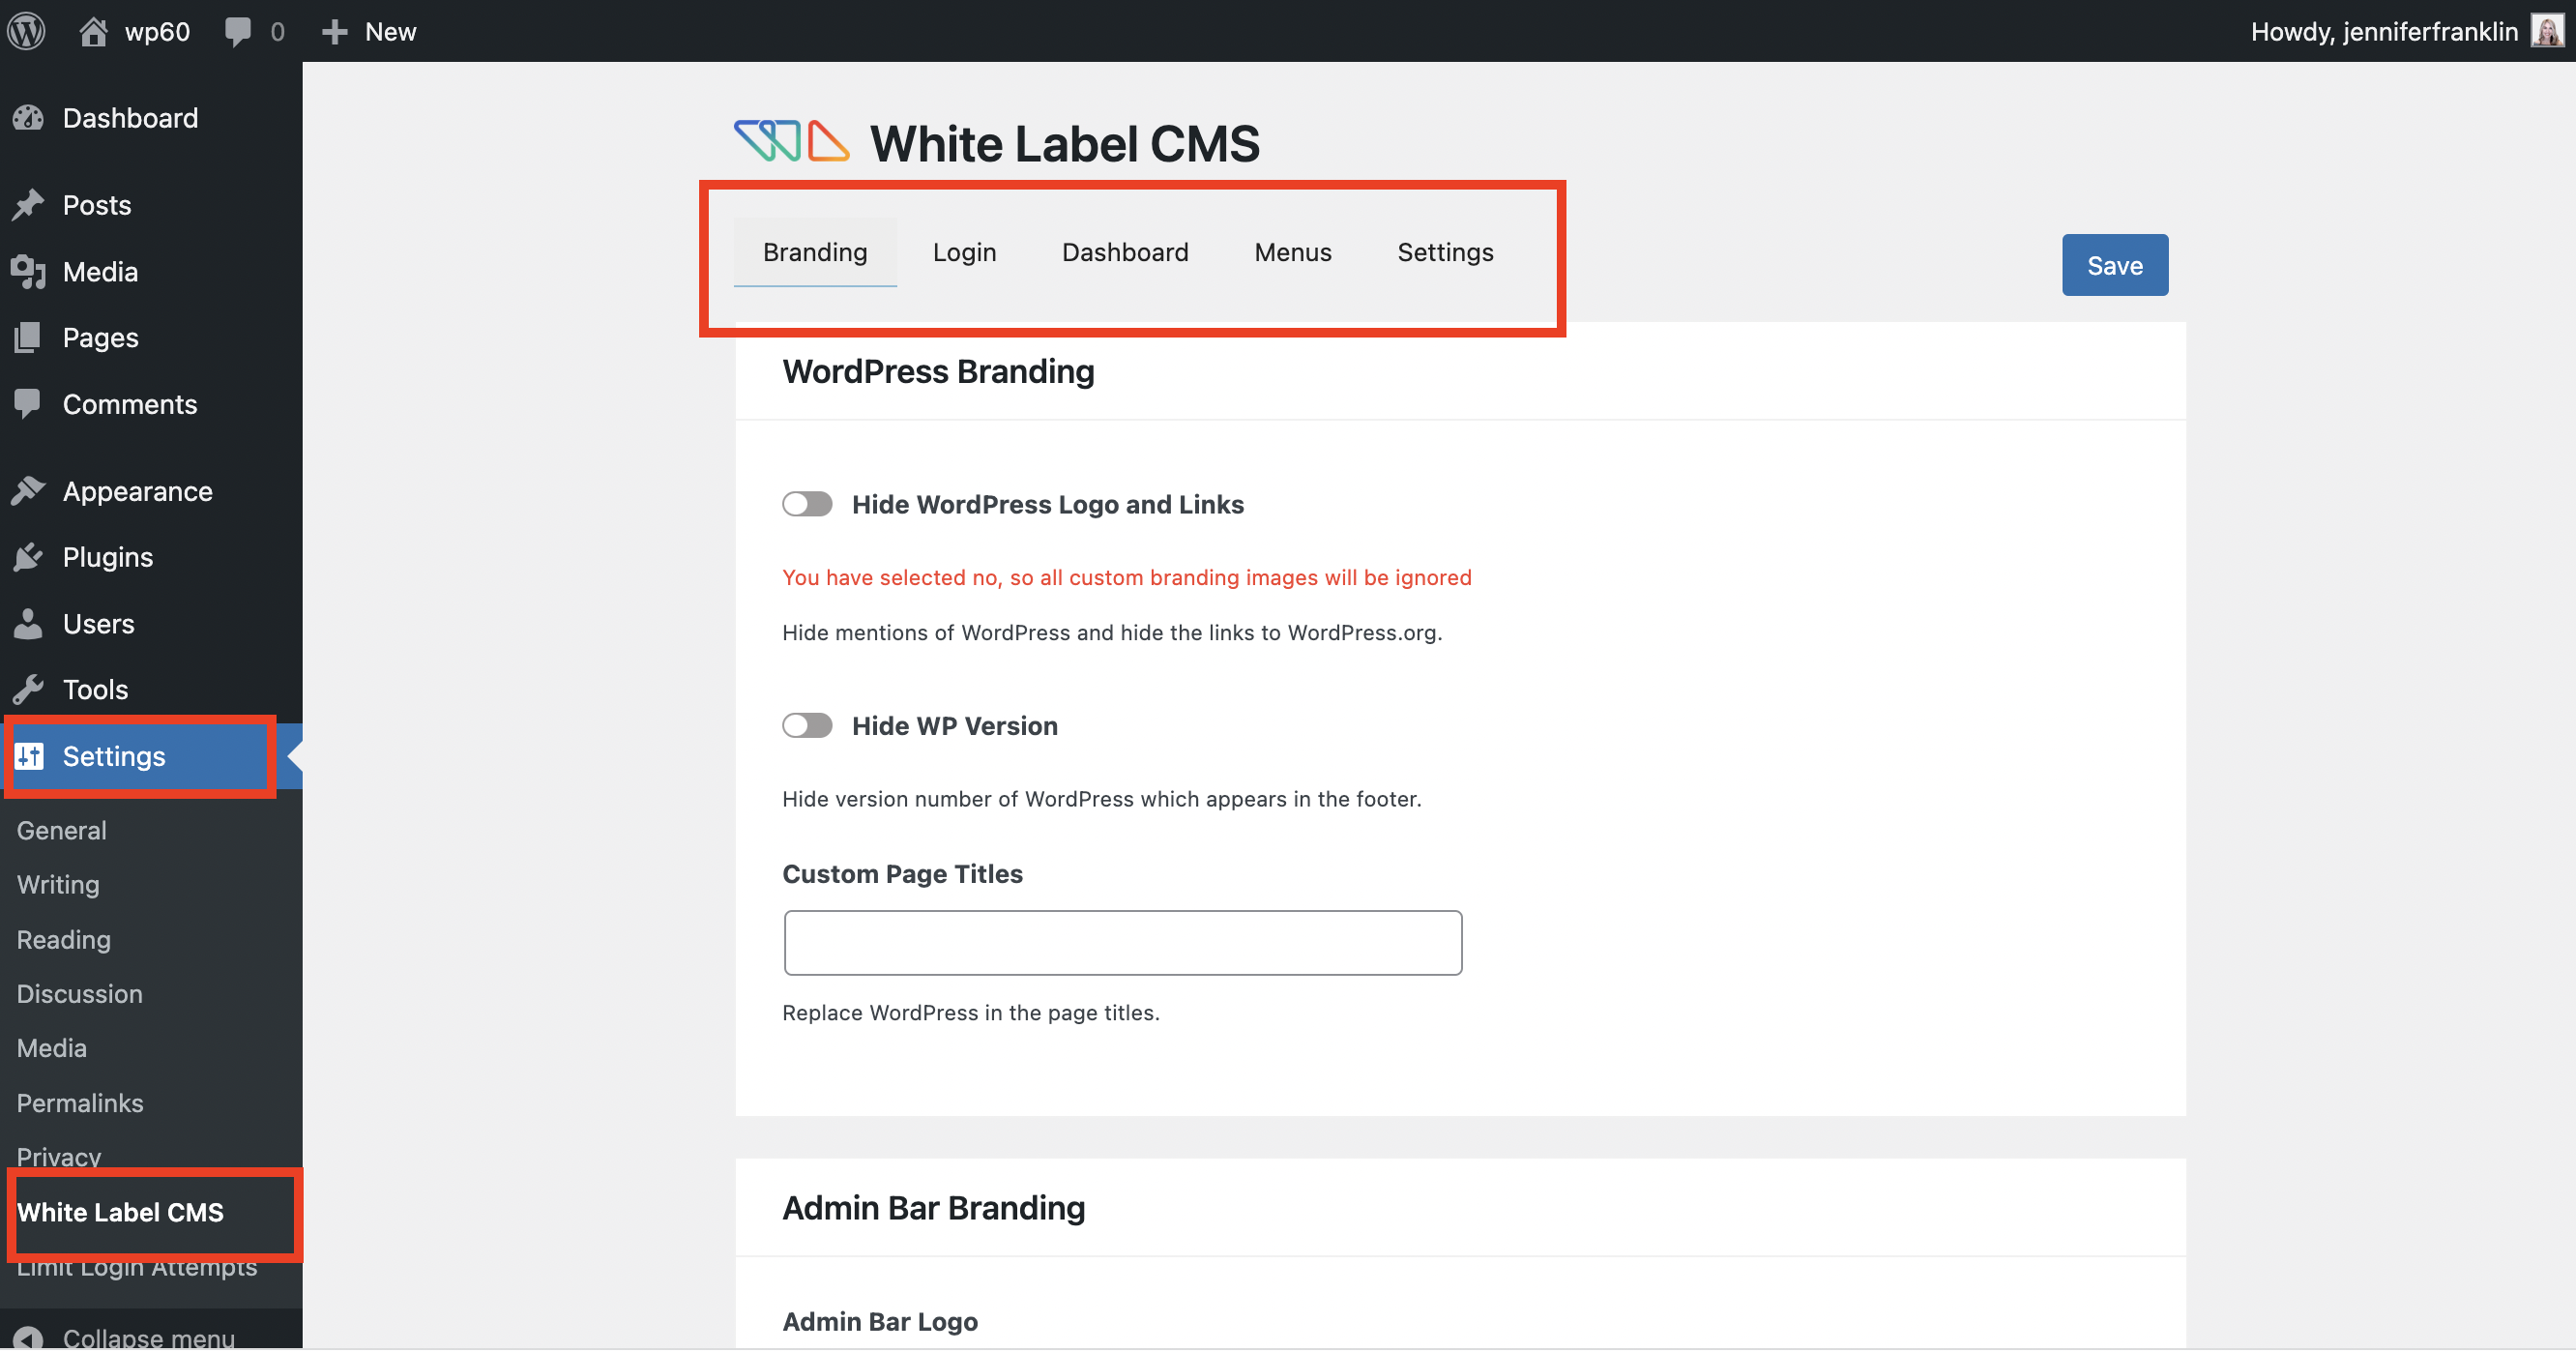 white label cms settings page